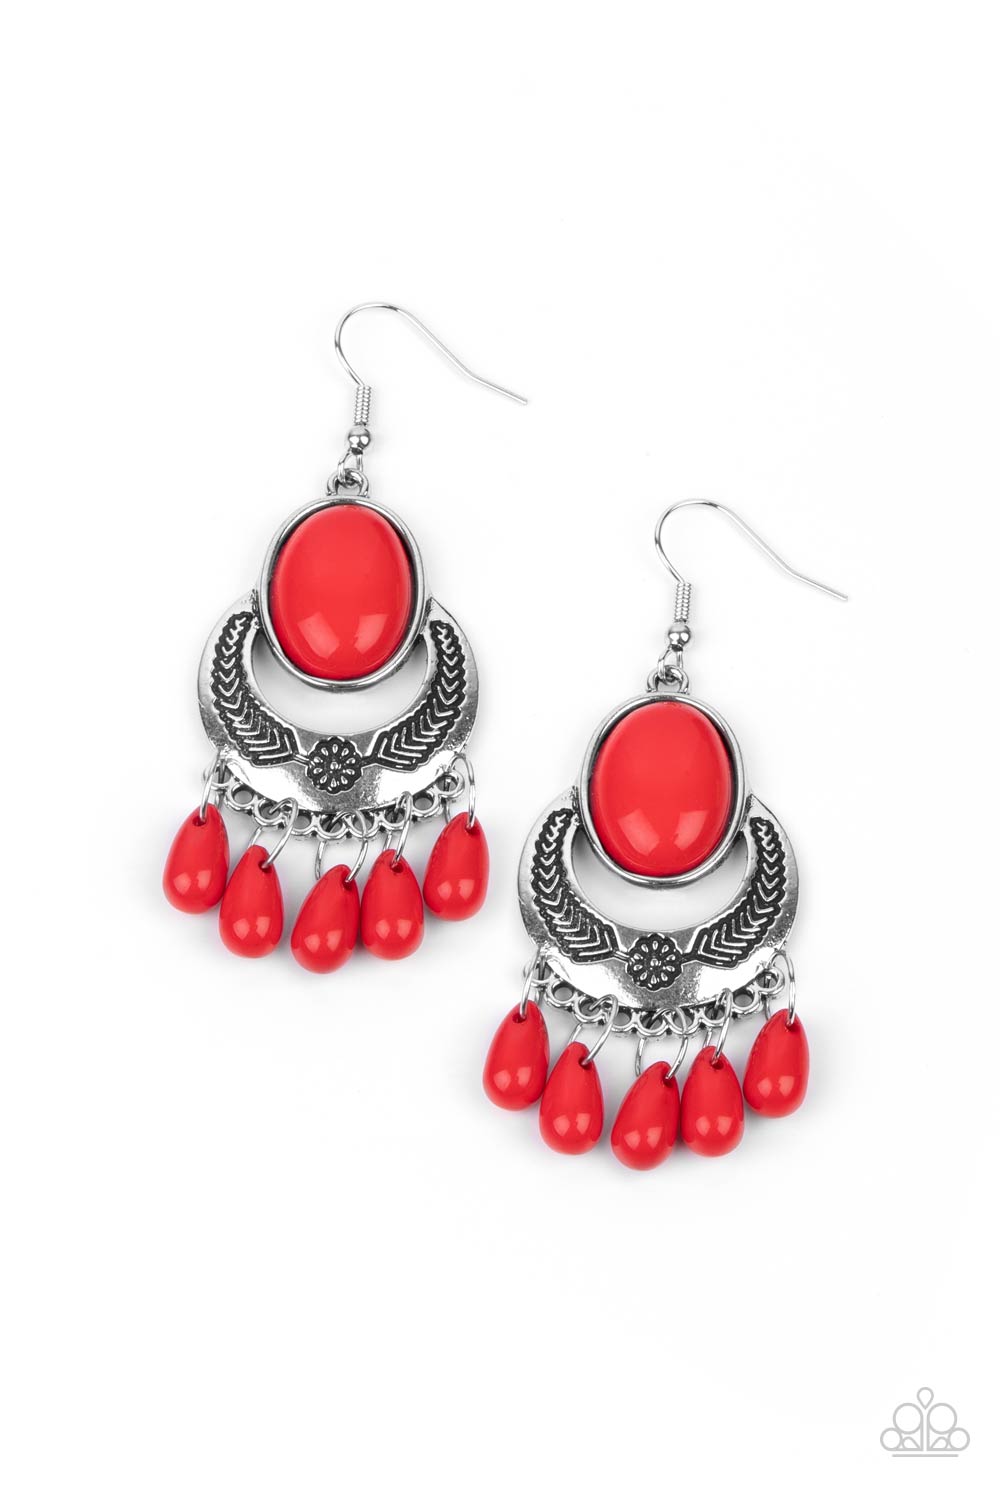 Paparazzi Prairie Flirt Red Fringe Earring. #P5WH-RDXX-123XX. Subscribe & Save. Floral Earrings